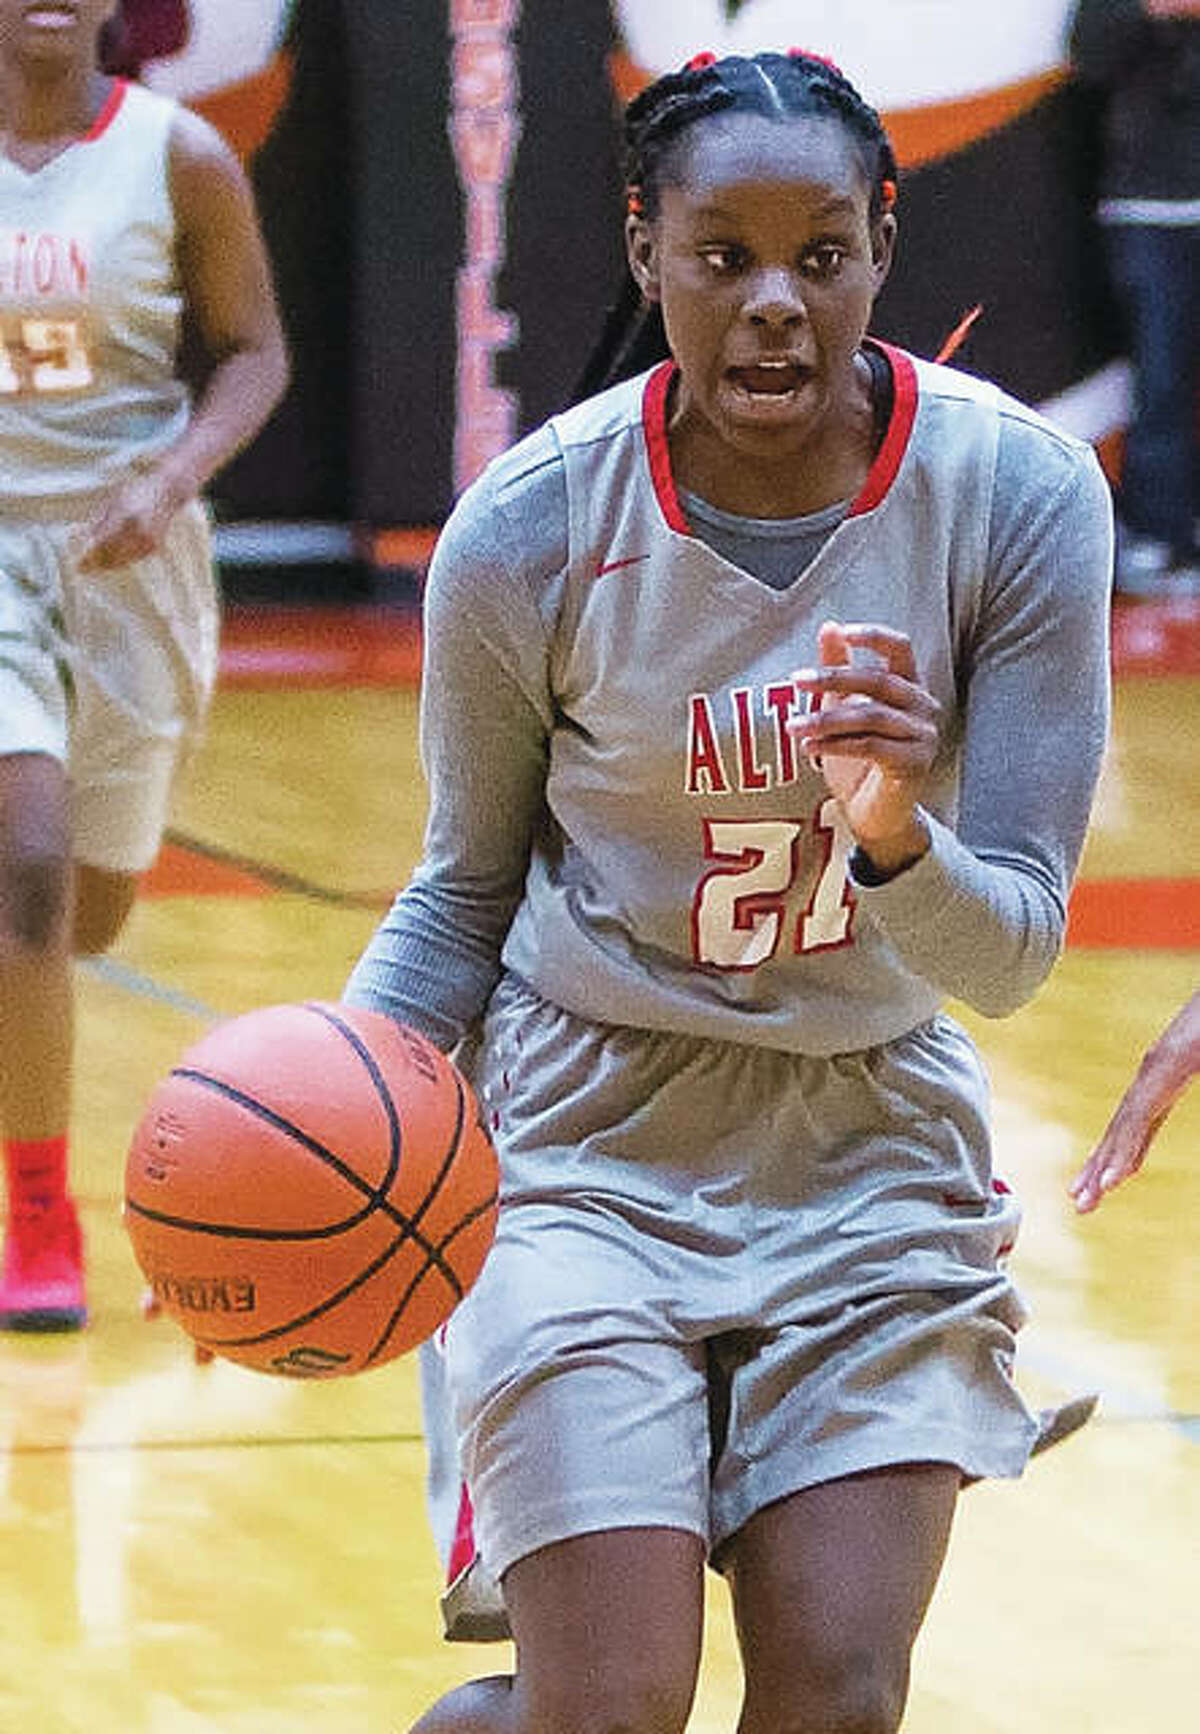 Alton’s Laila McNeal scored 15 points in the Redbirds’ victory Tuesday night in the Alton Tip-Off Classic girls basketball tournament.